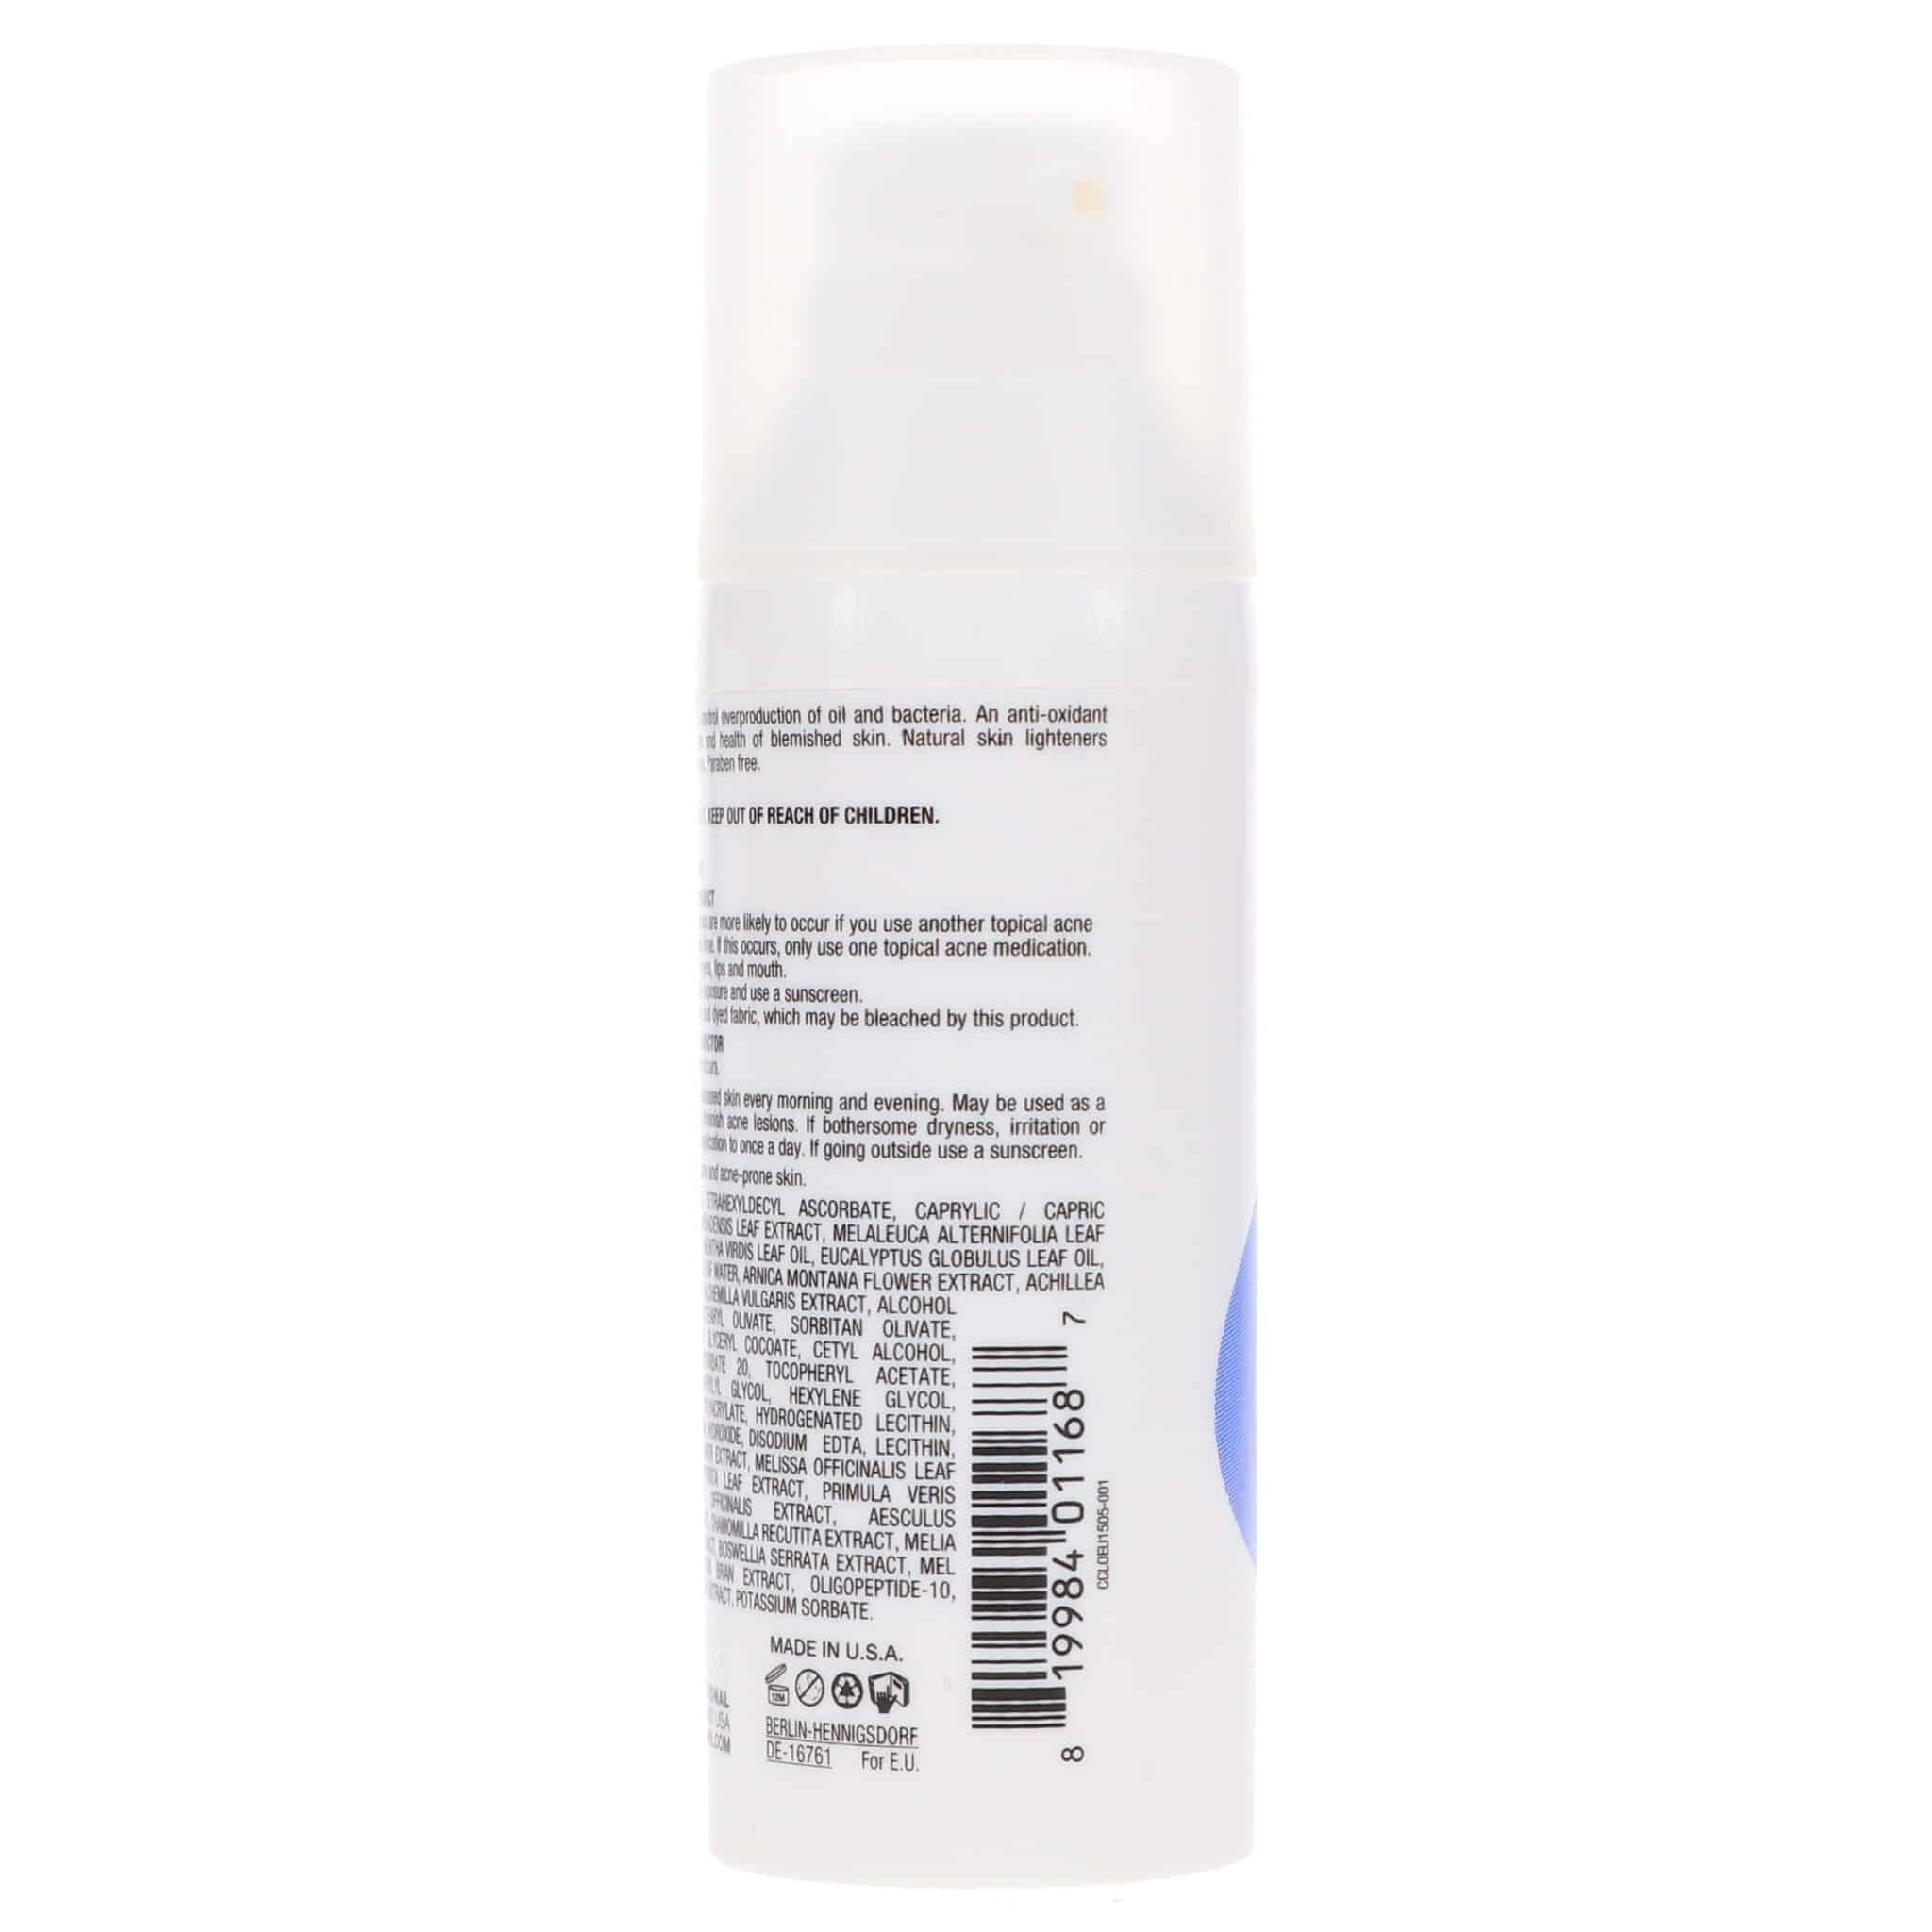 IMAGE Skincare Clear Cell Clarifying Lotion 1.7 oz | LaLa Daisy